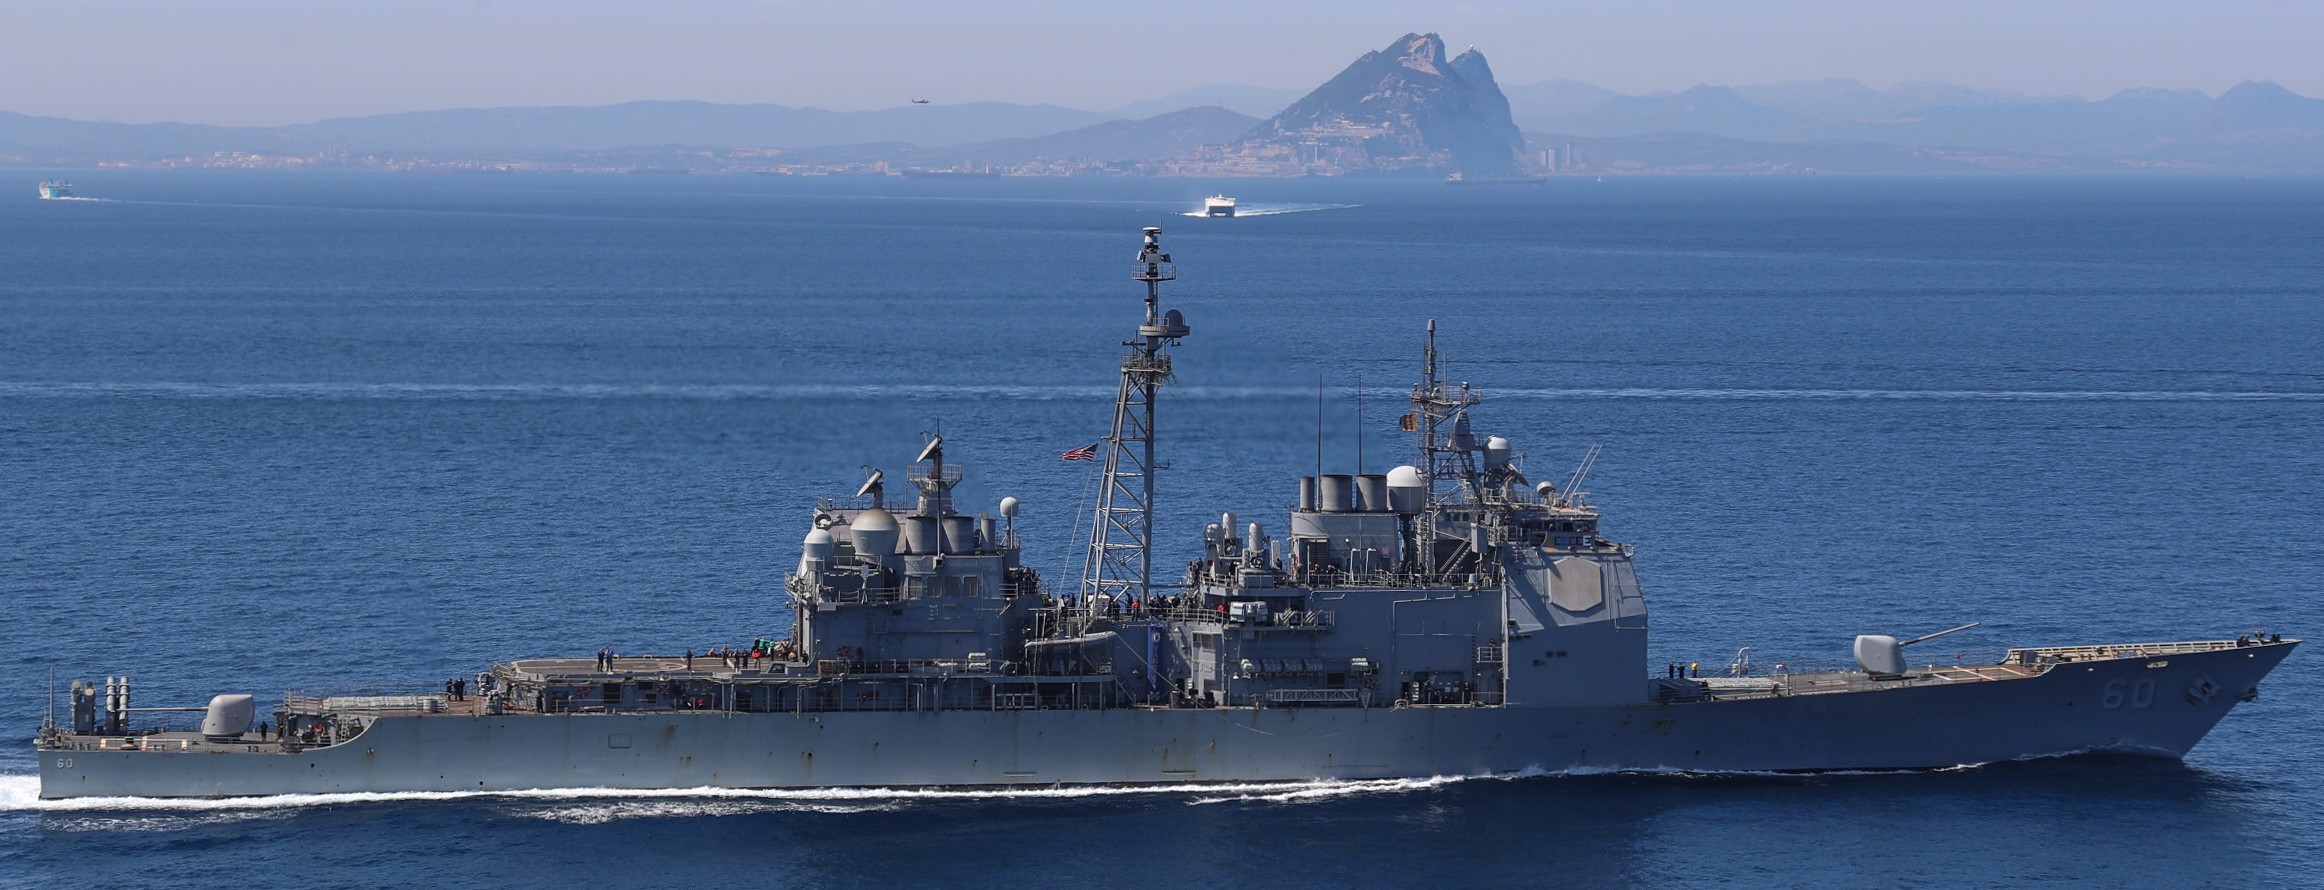 cg-60 uss normandy ticonderoga class guided missile cruiser aegis us navy strait of gibraltar 158